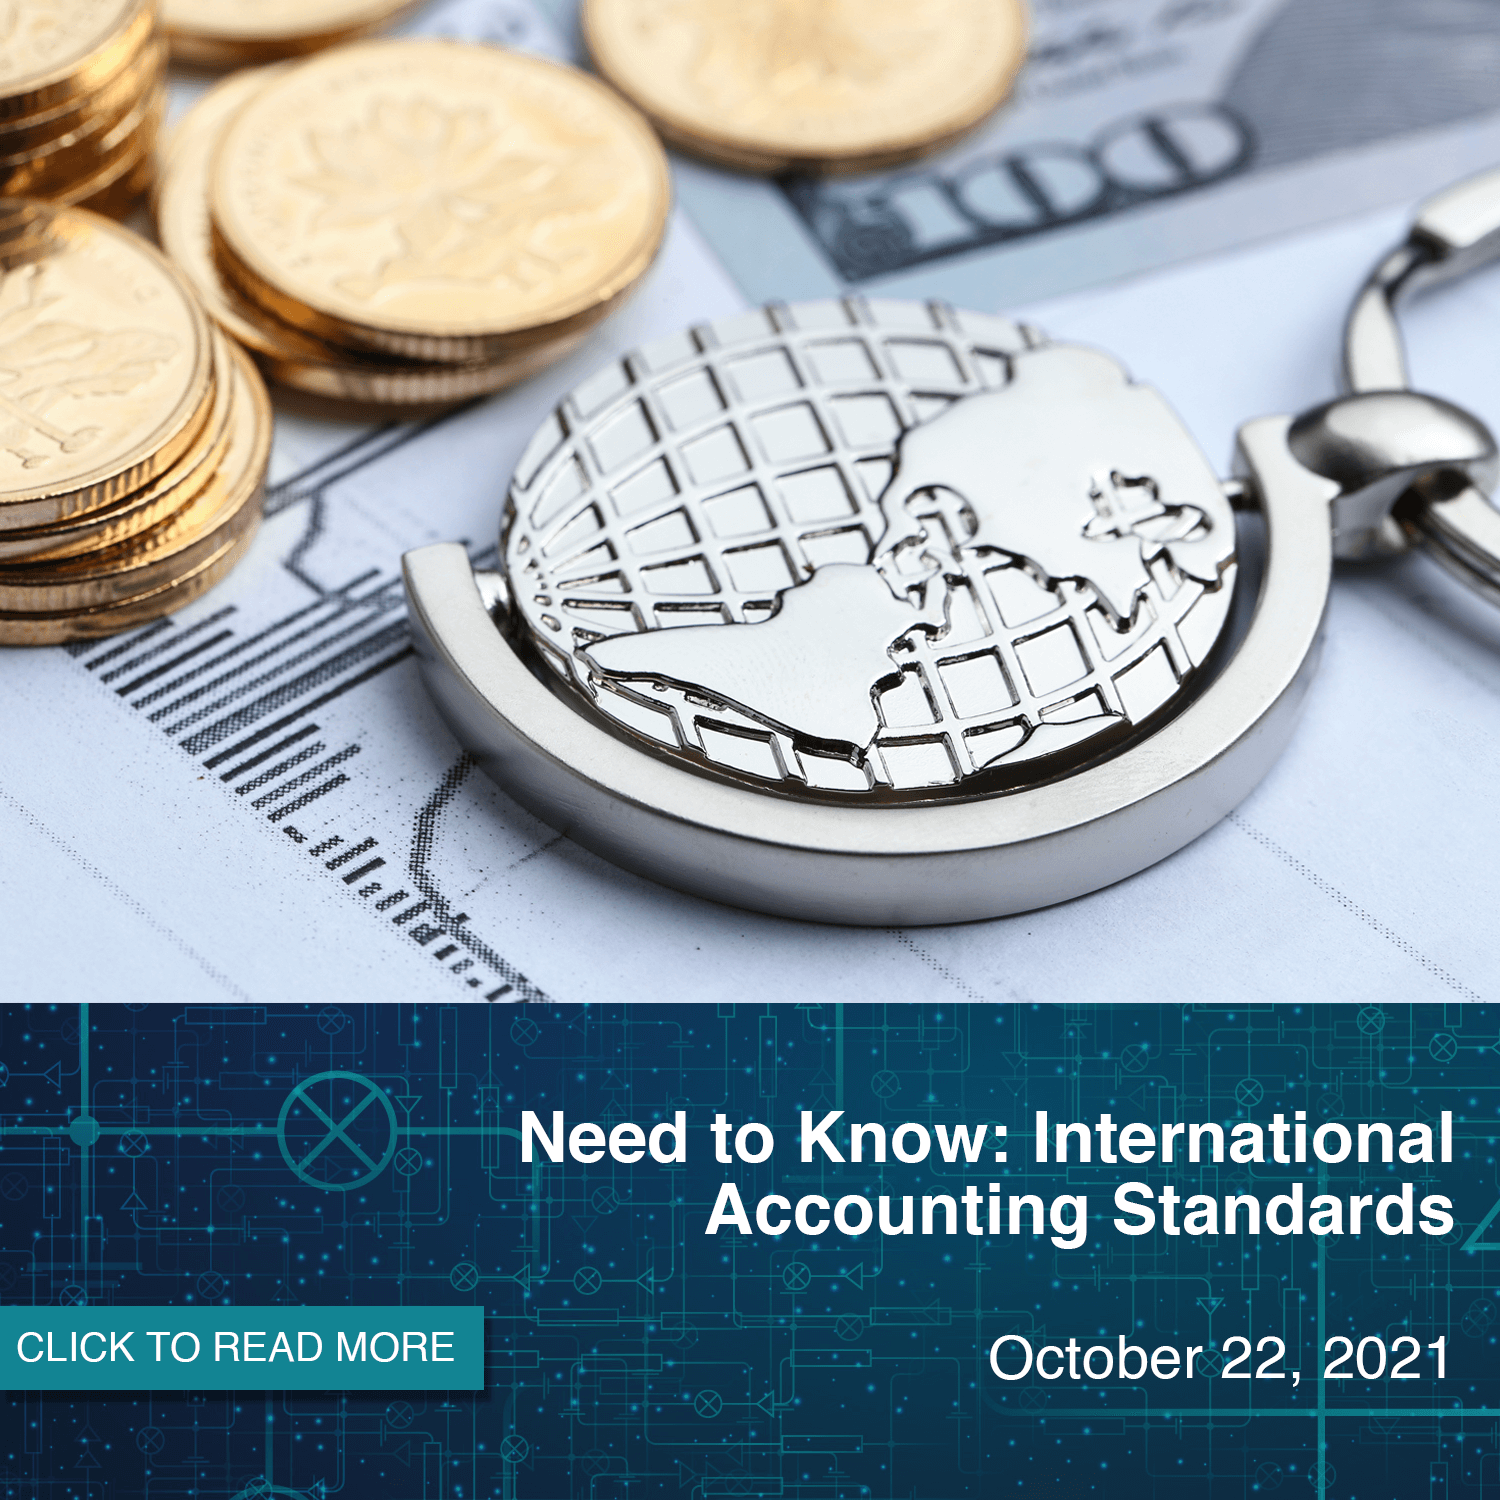 Need to Know: International Accounting Standards